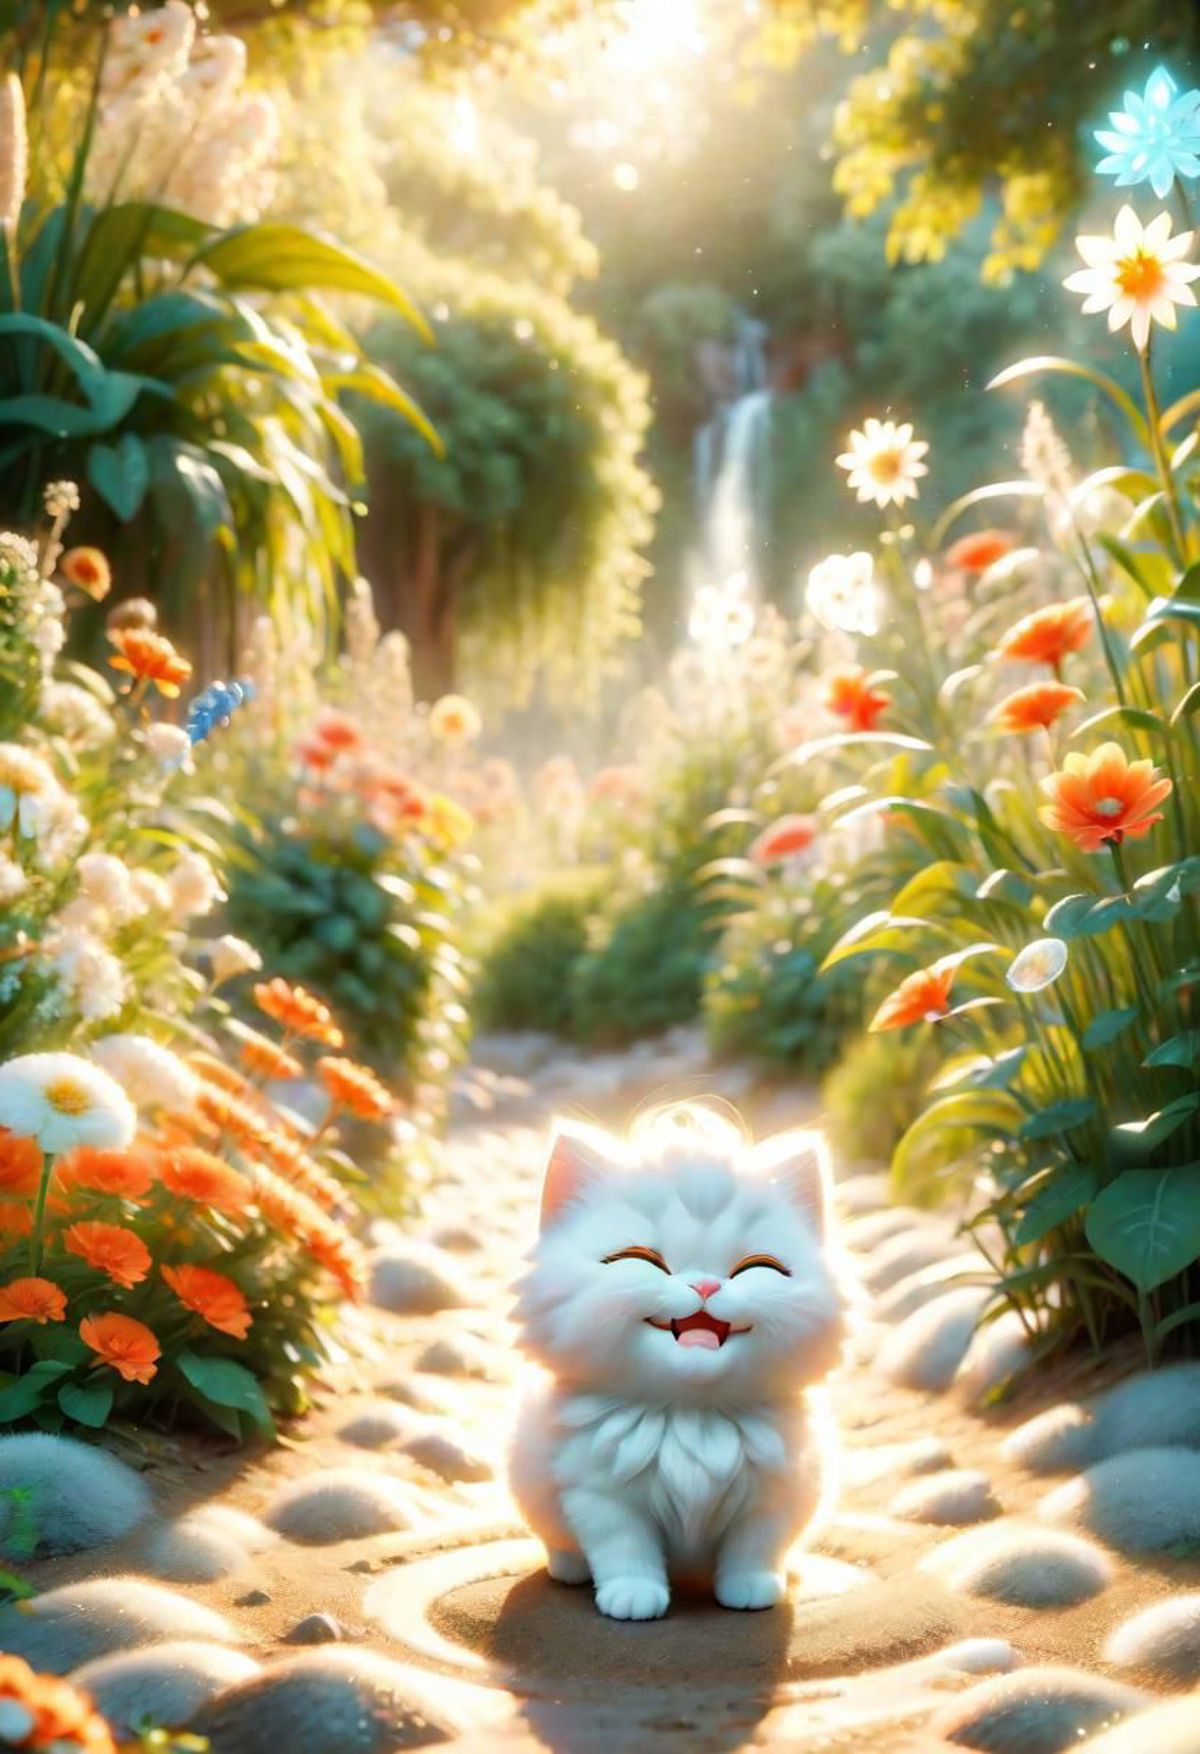 Cartoon Illustration of a Smiling Cat on a Sunny Path with Flowers and Greenery